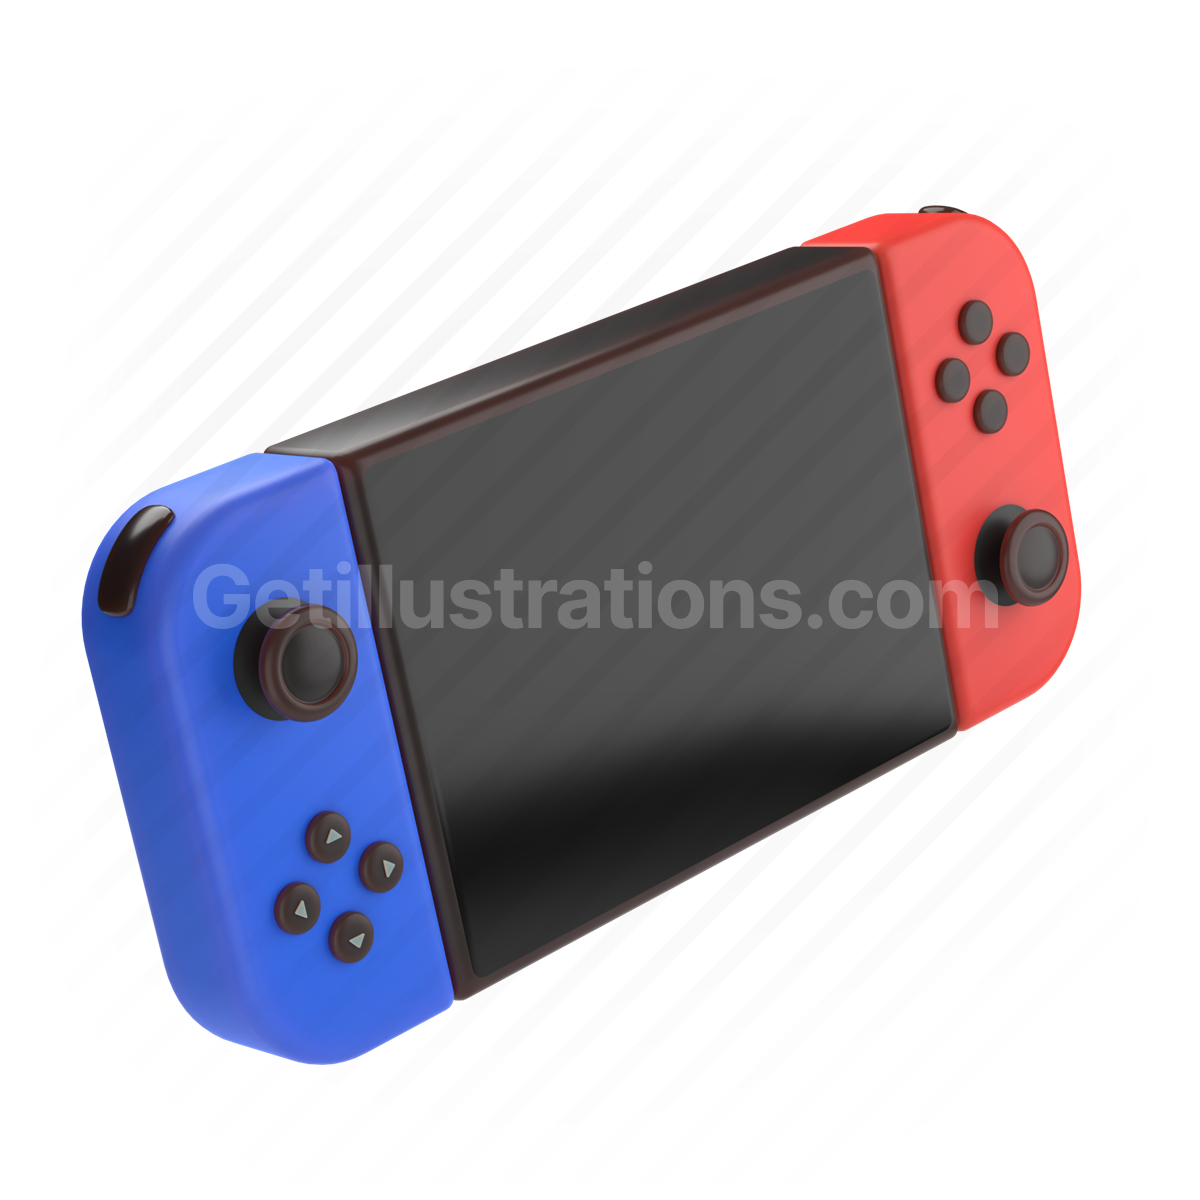 switch, handheld, console, electronic, device, game, video game, gaming